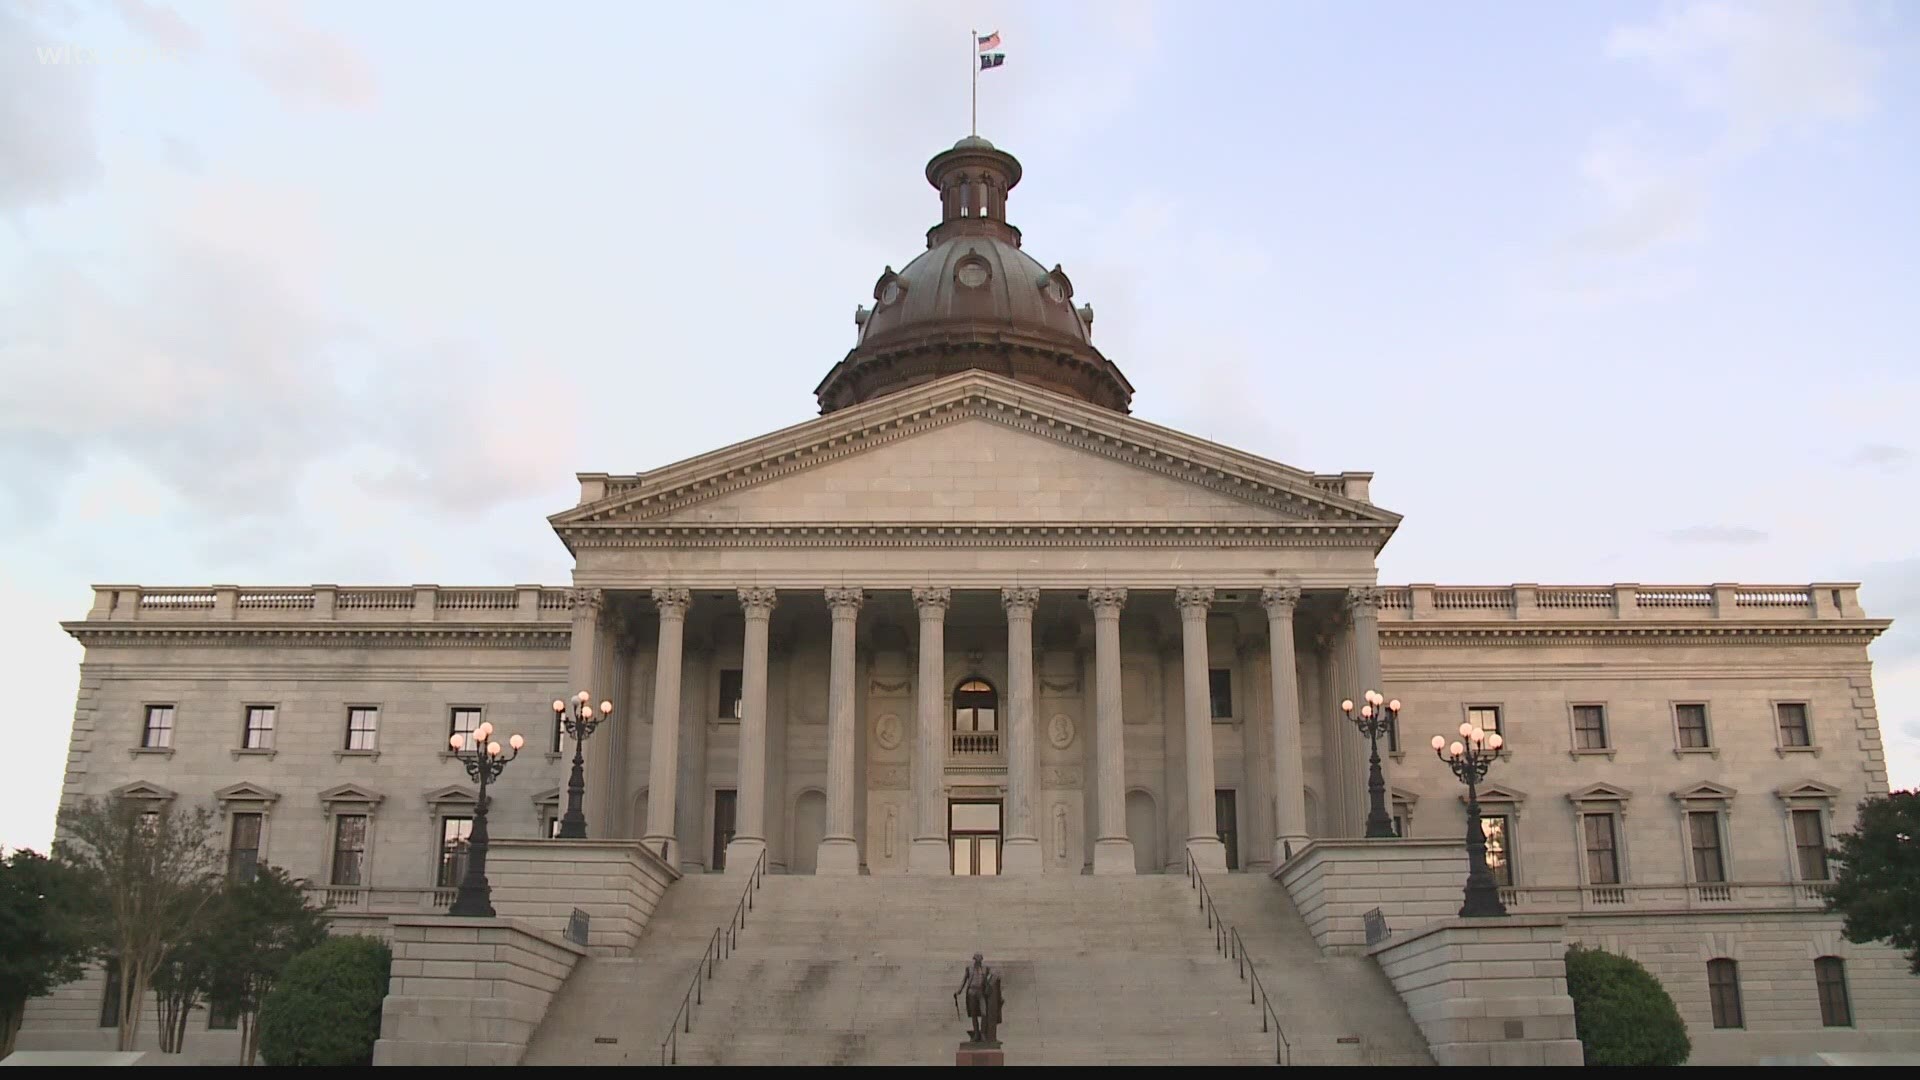 Many South Carolina lawmakers have pre-filed bills ahead of the 2021 legislative session. They aim to tackle issues from public health to police reform.